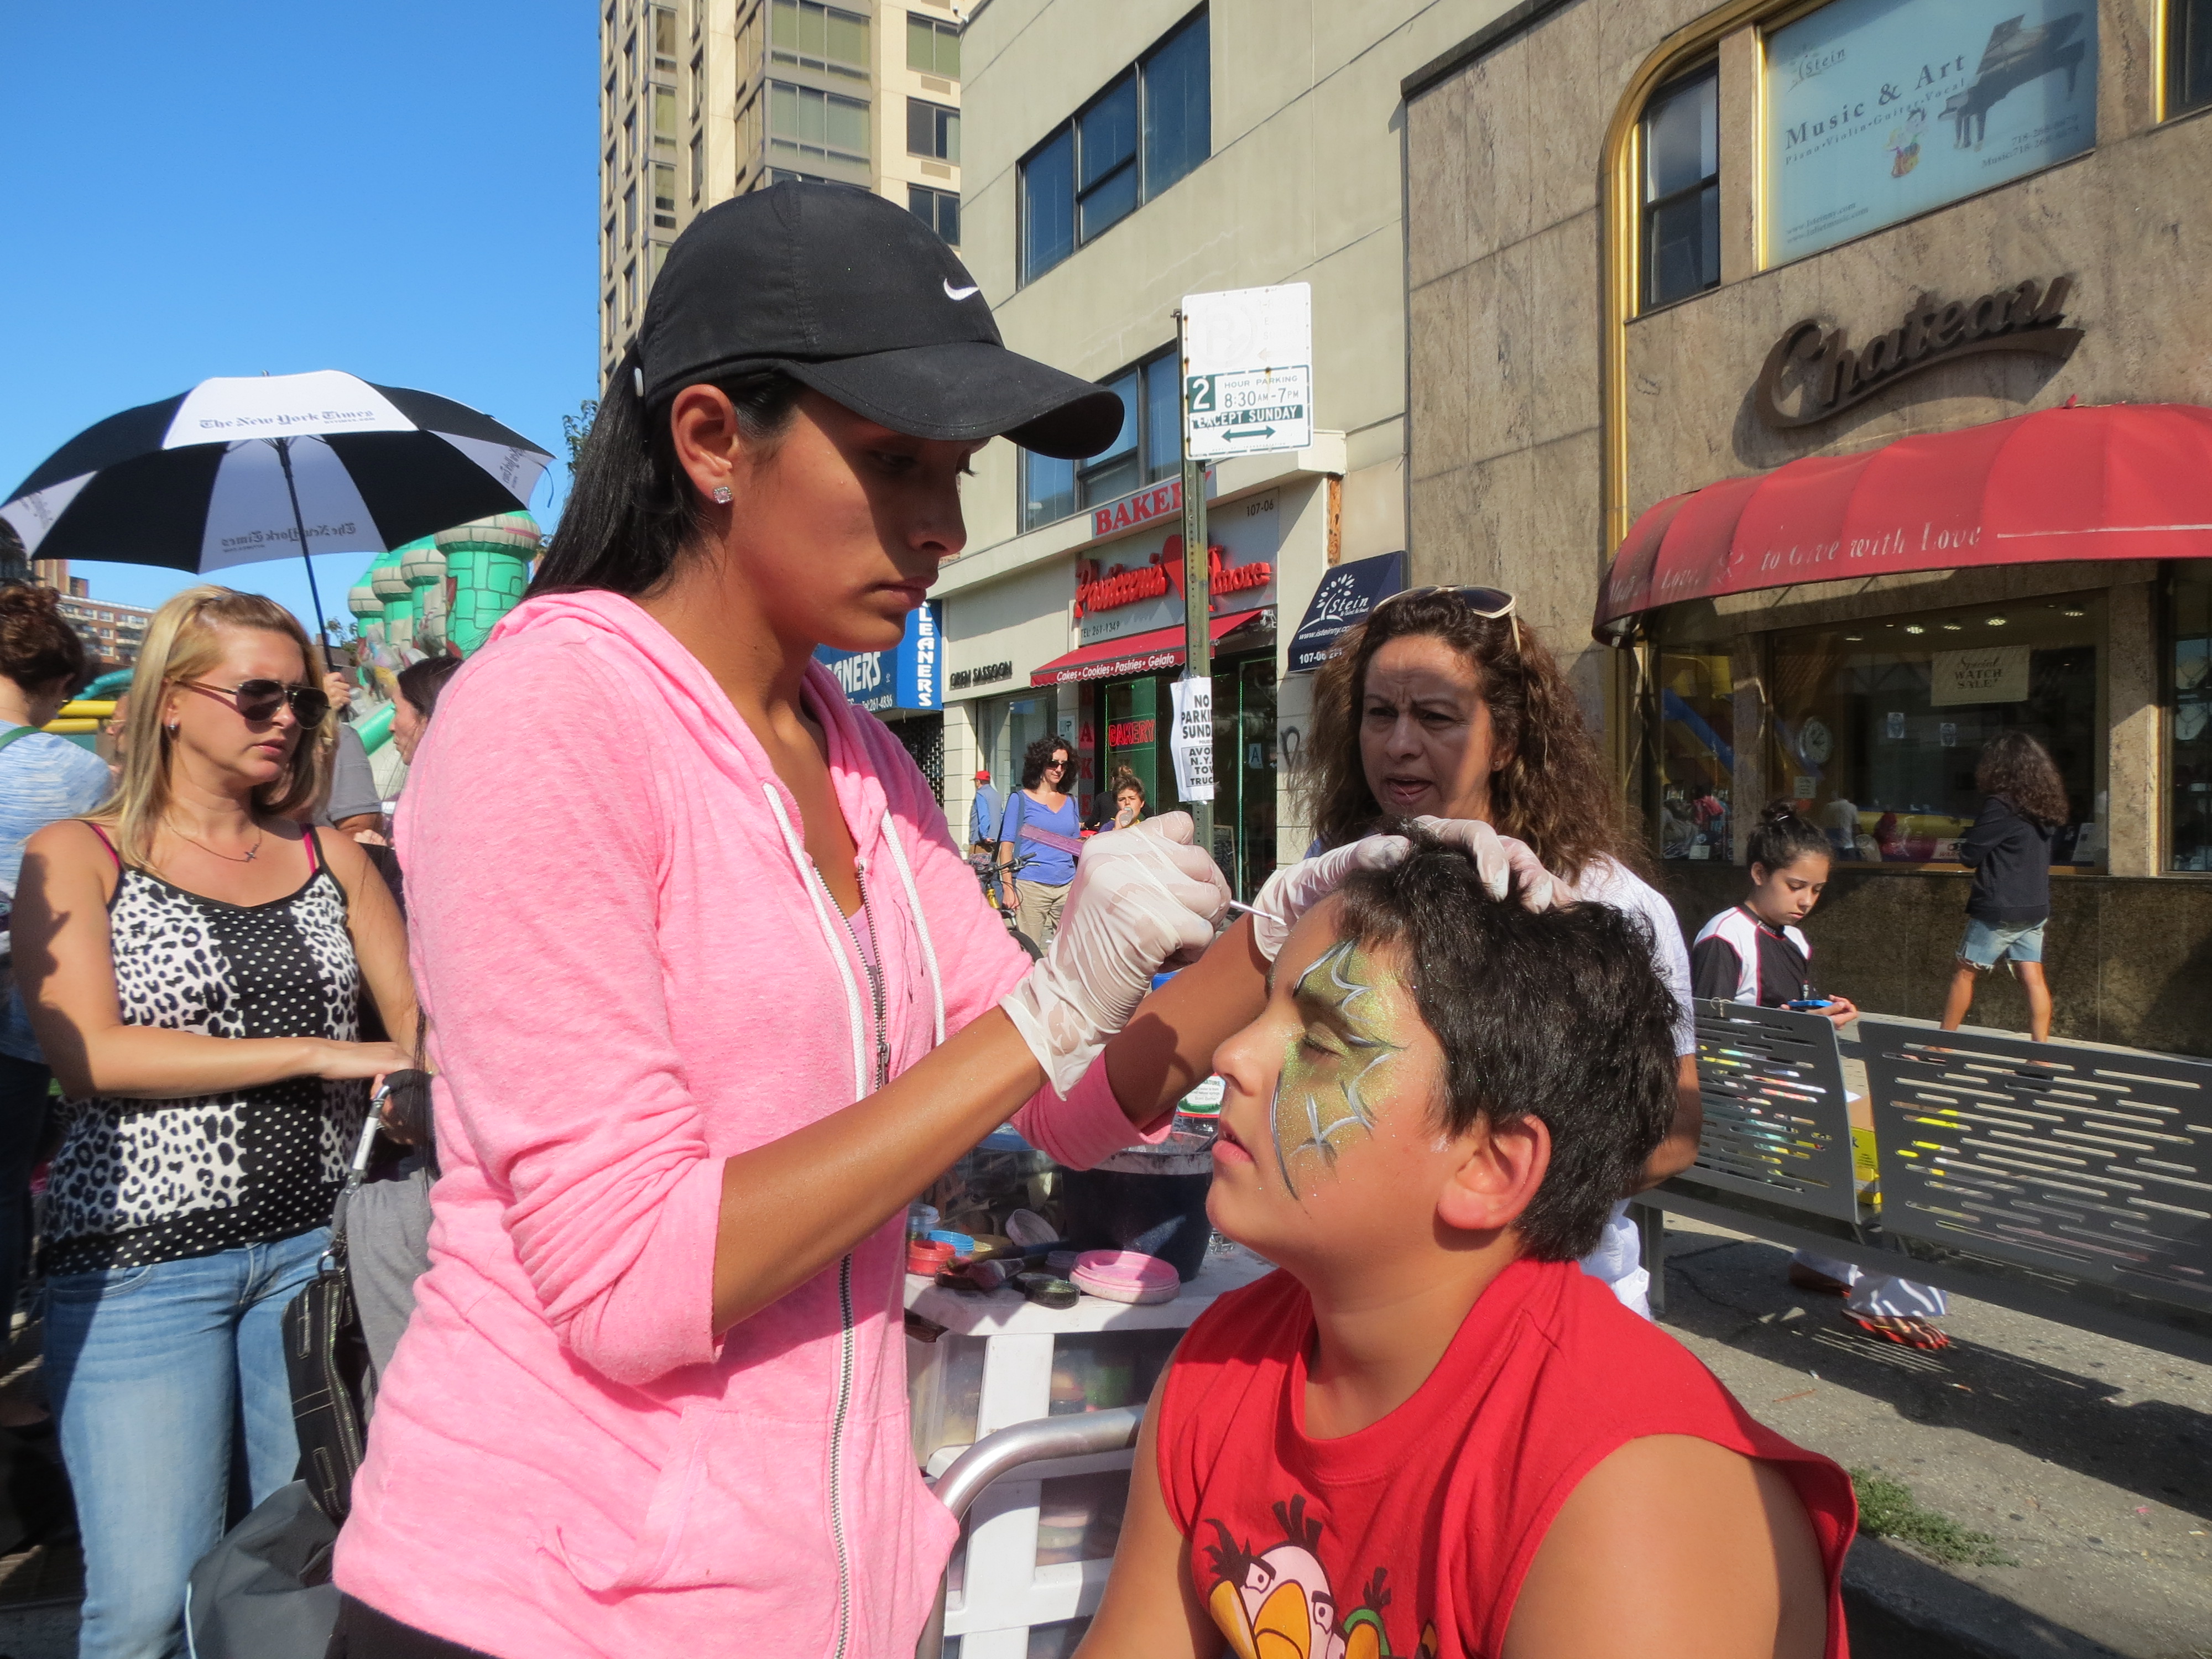 Yaheli Mordechai, 8, of Briarwood, sits patiently as his face is painted.